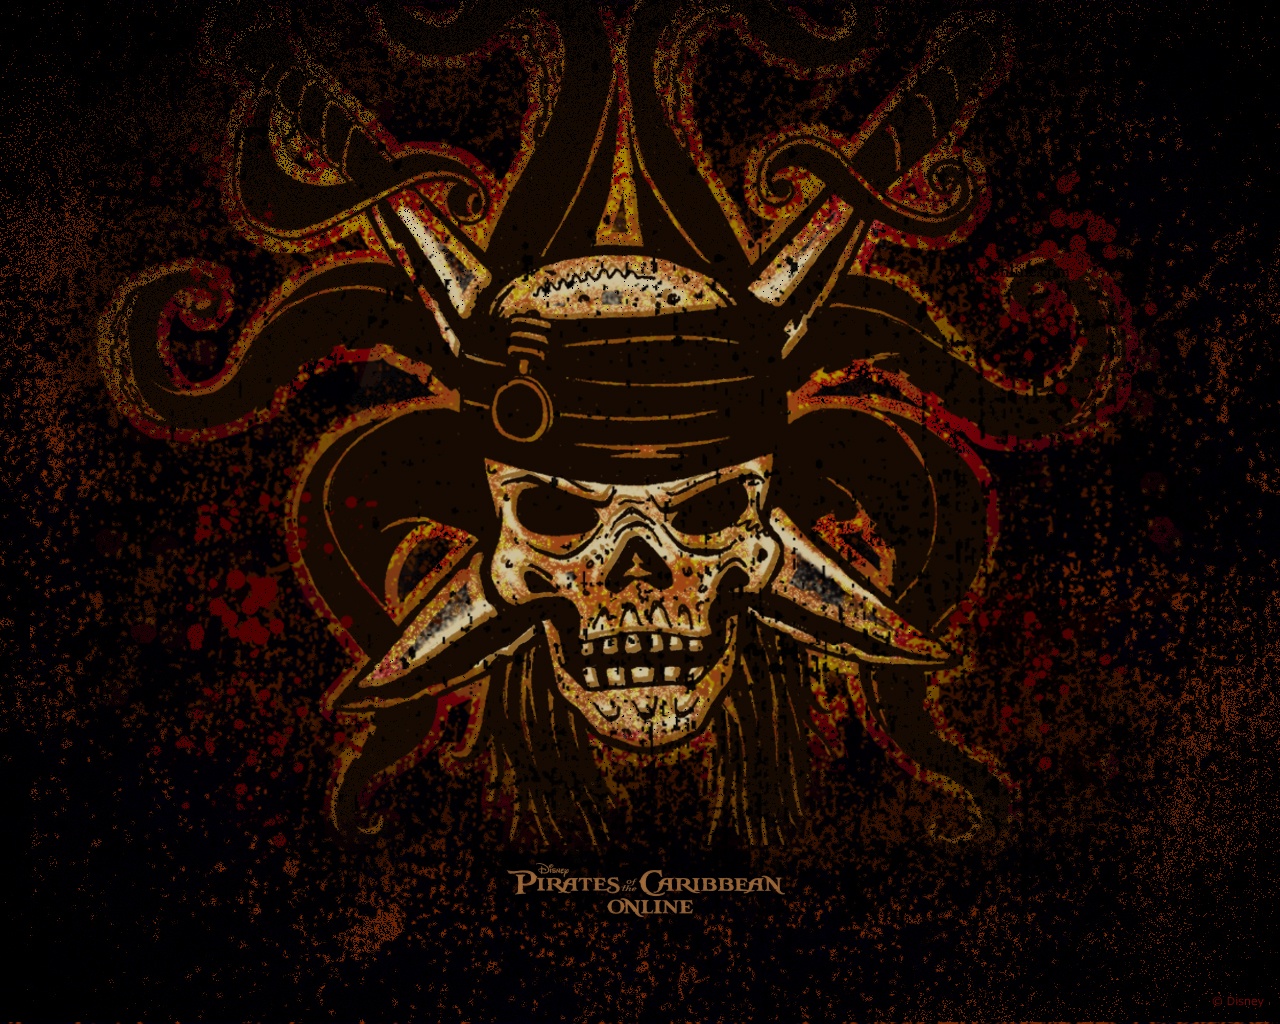 Pirates Of The Caribbean Wallpaper:1280x1024